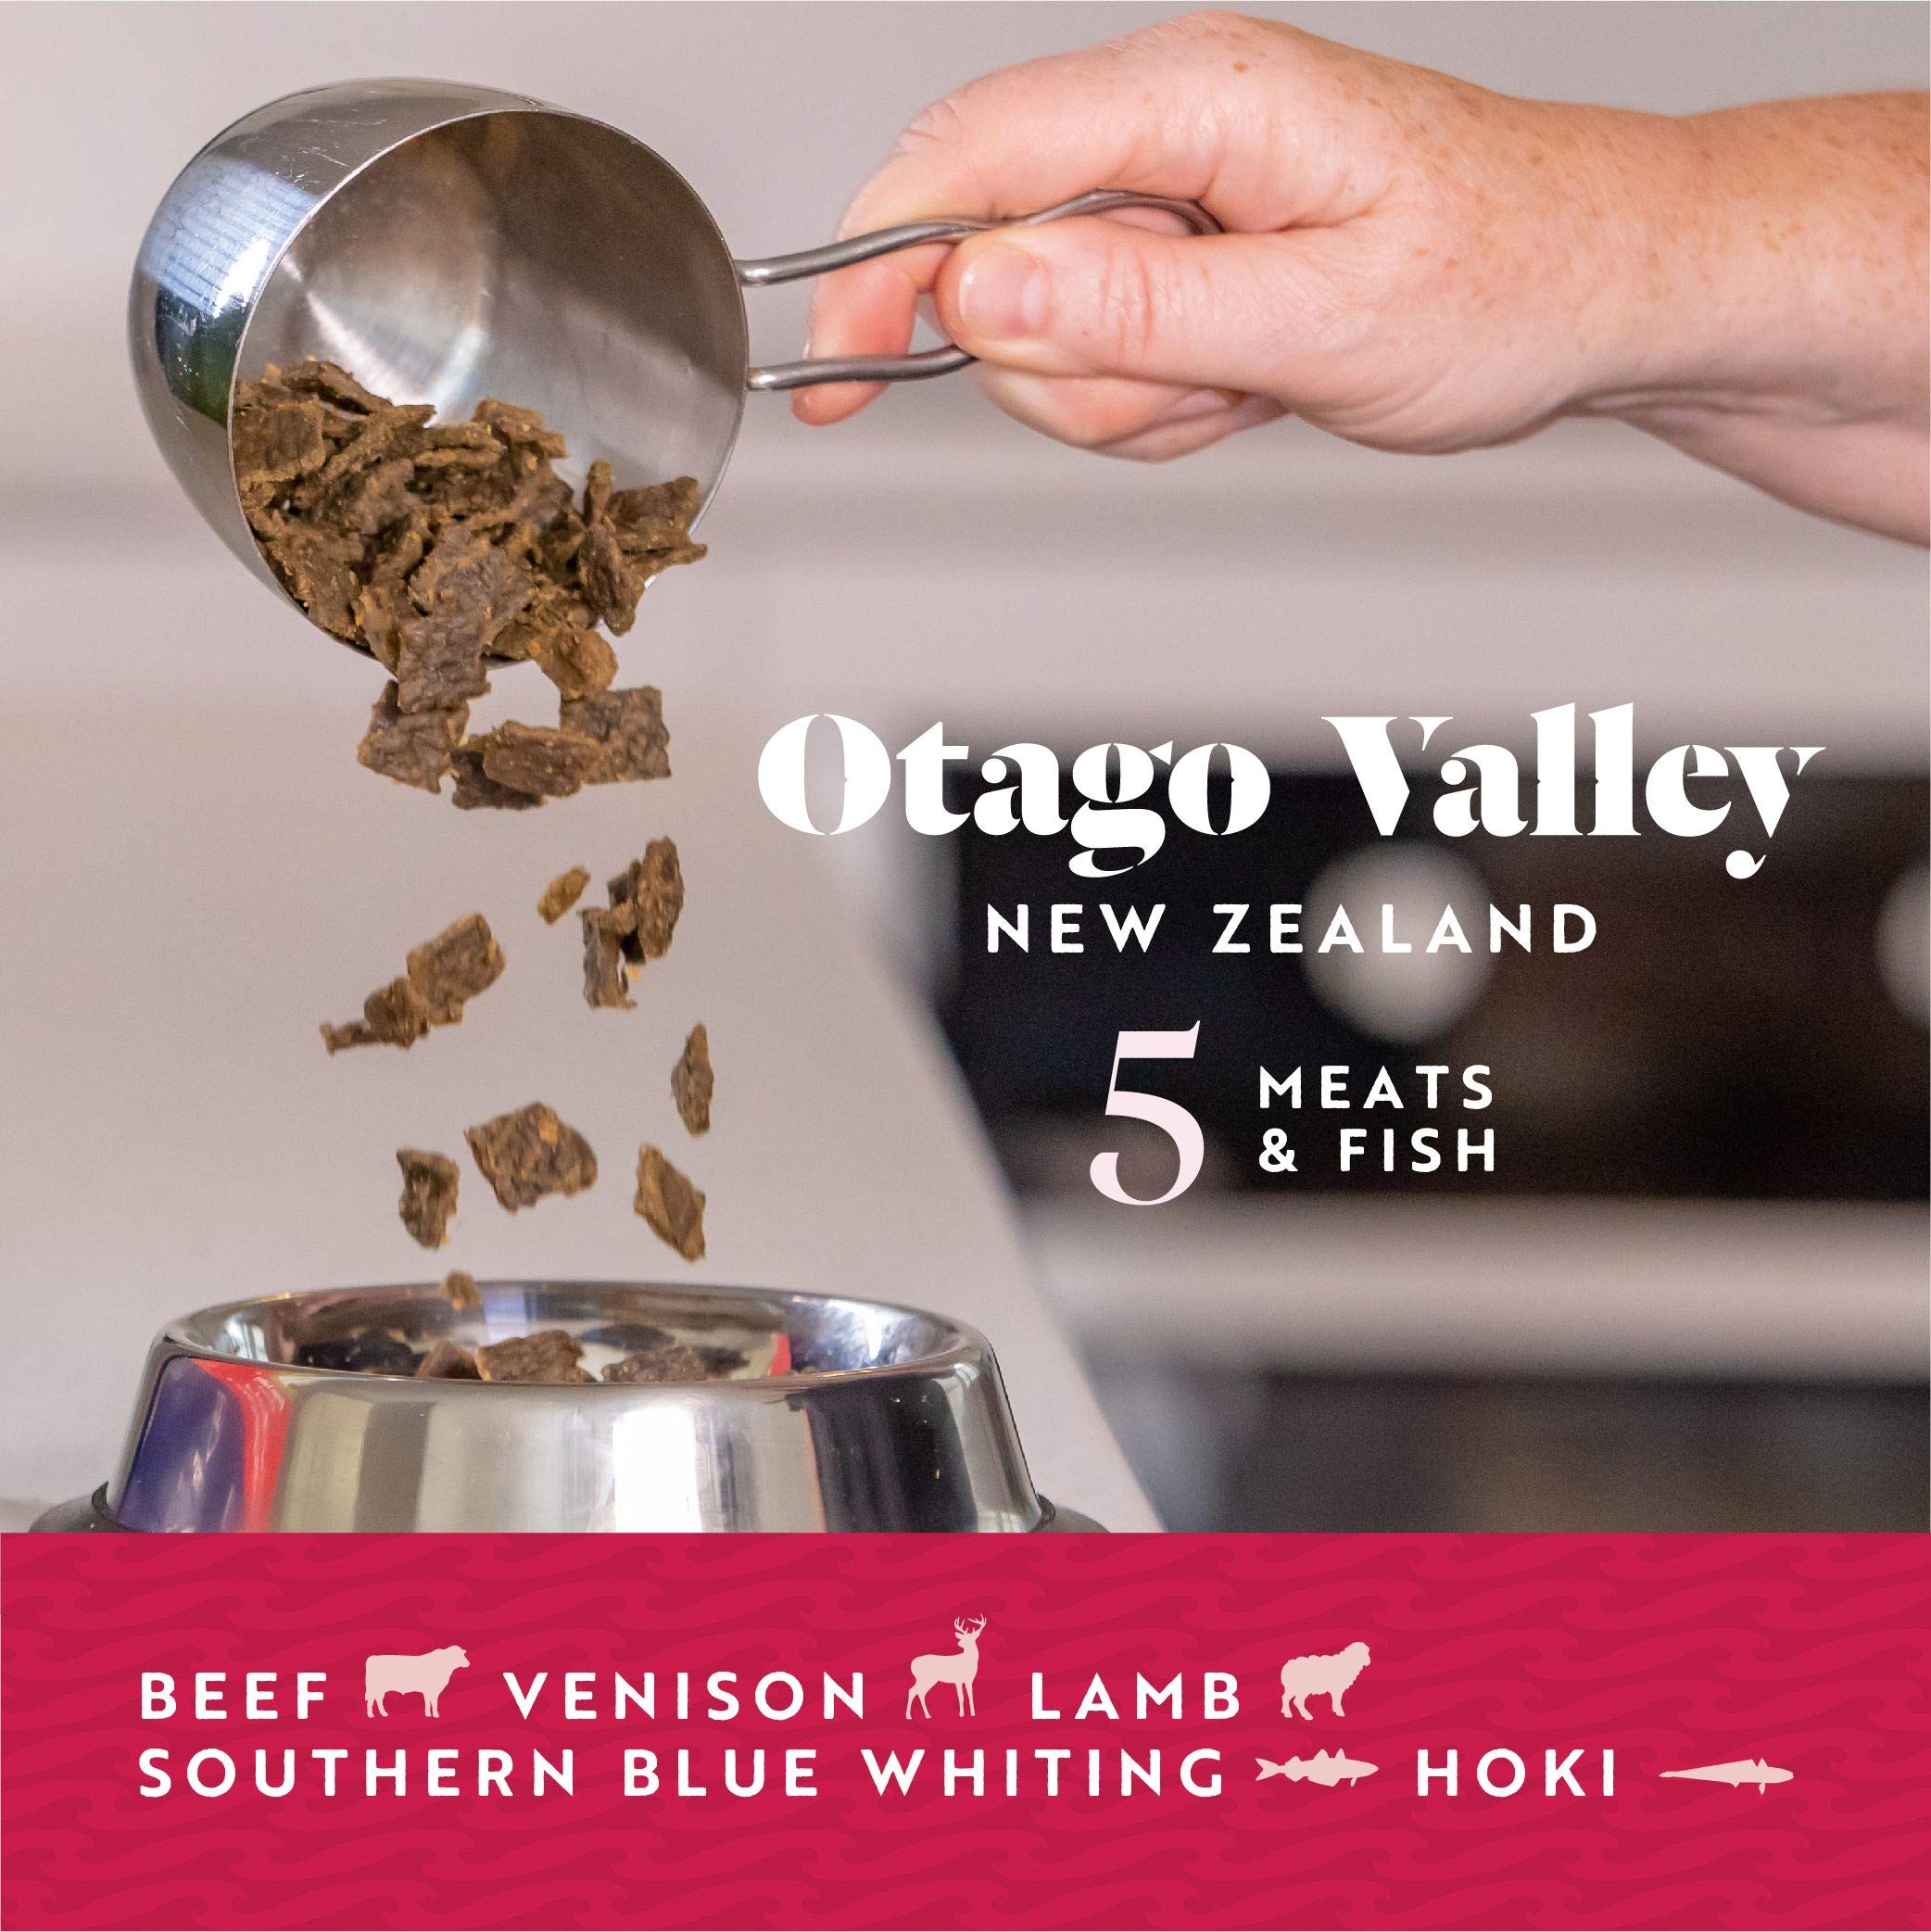 Air-Dried Otago Valley Recipe for Dogs